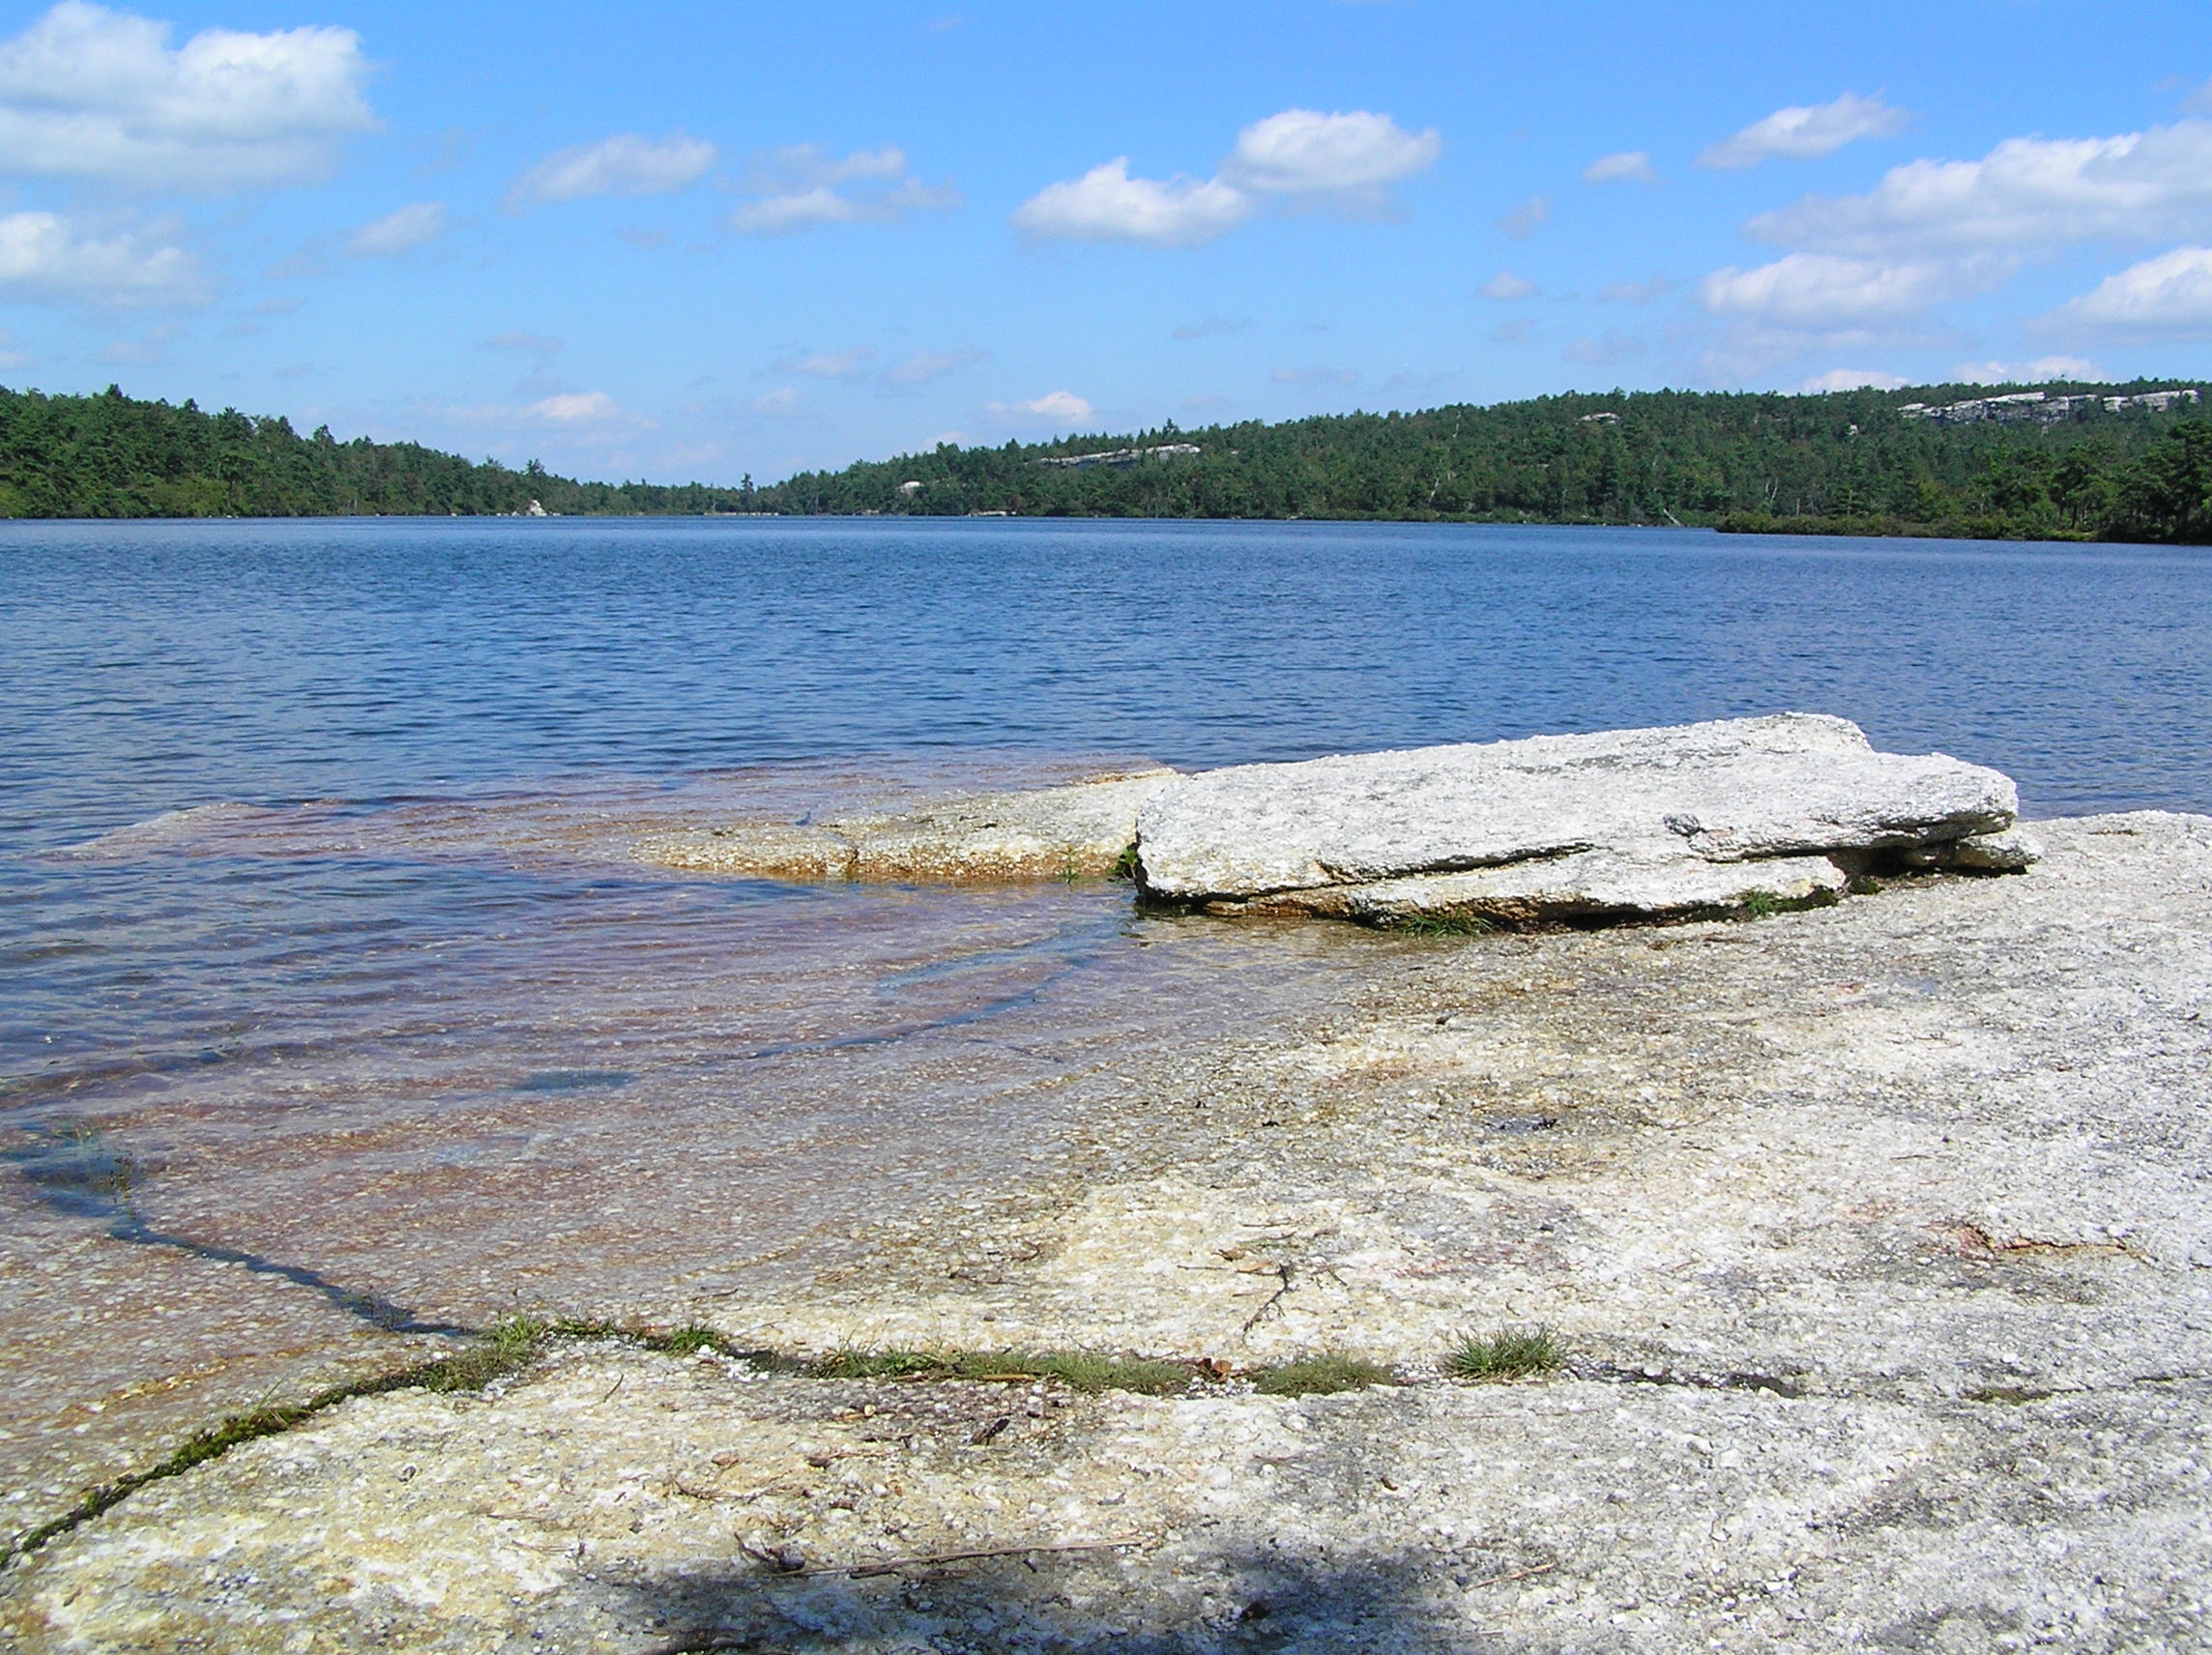 File:Best Swimming Spot in Lake Awosting.JPG - Wikimedia Commons